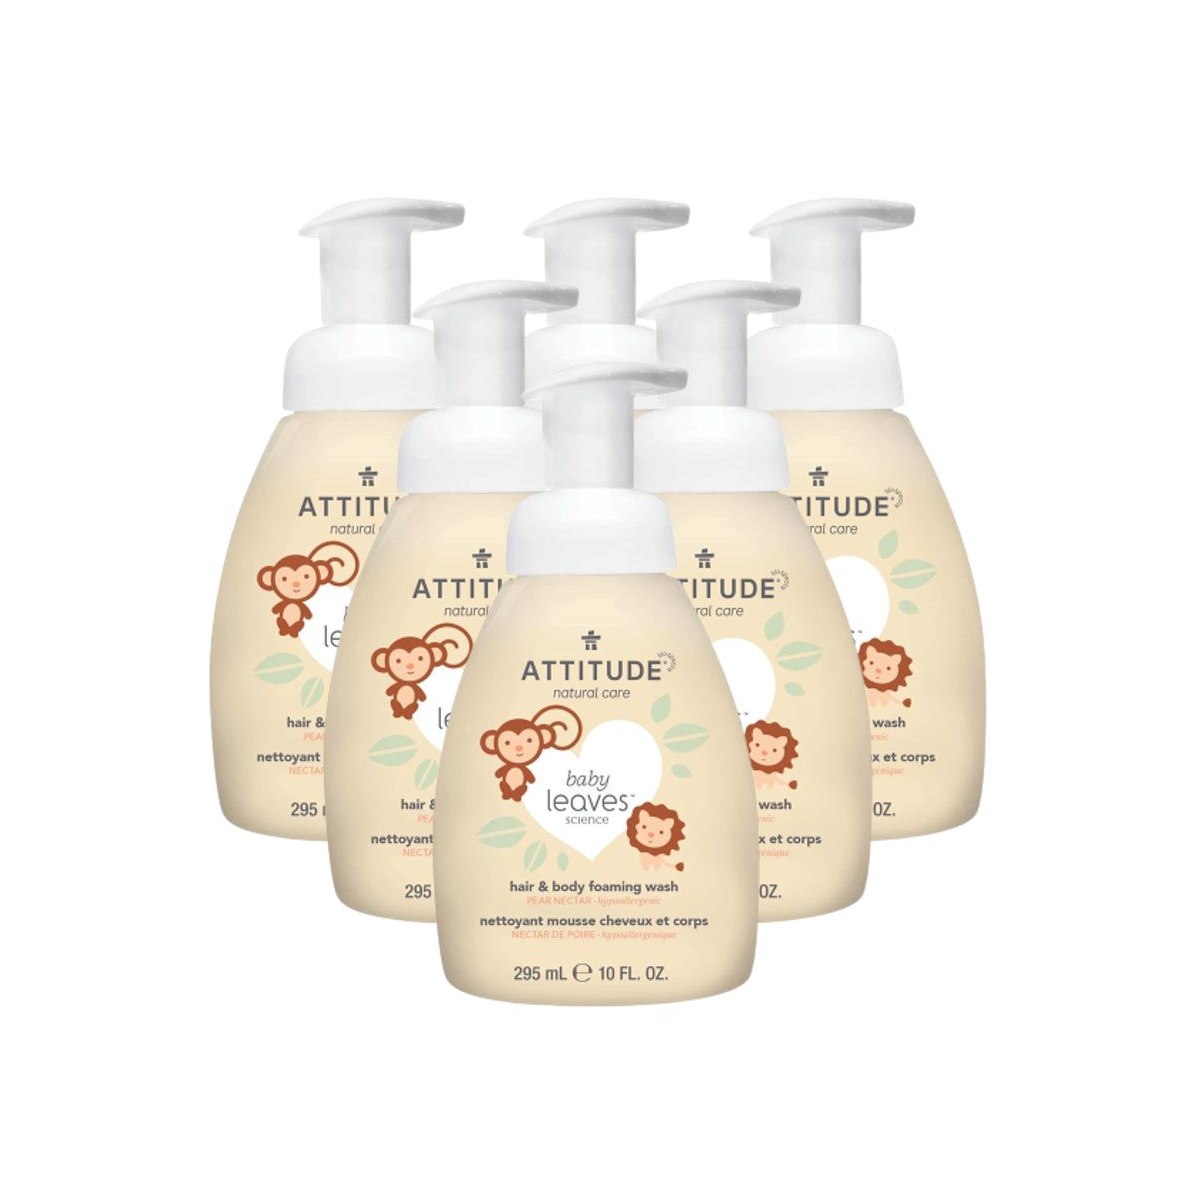 Case of 6 x Attitude Baby Leaves 2in1 Foaming Wash - Pear Nectar 295 ml